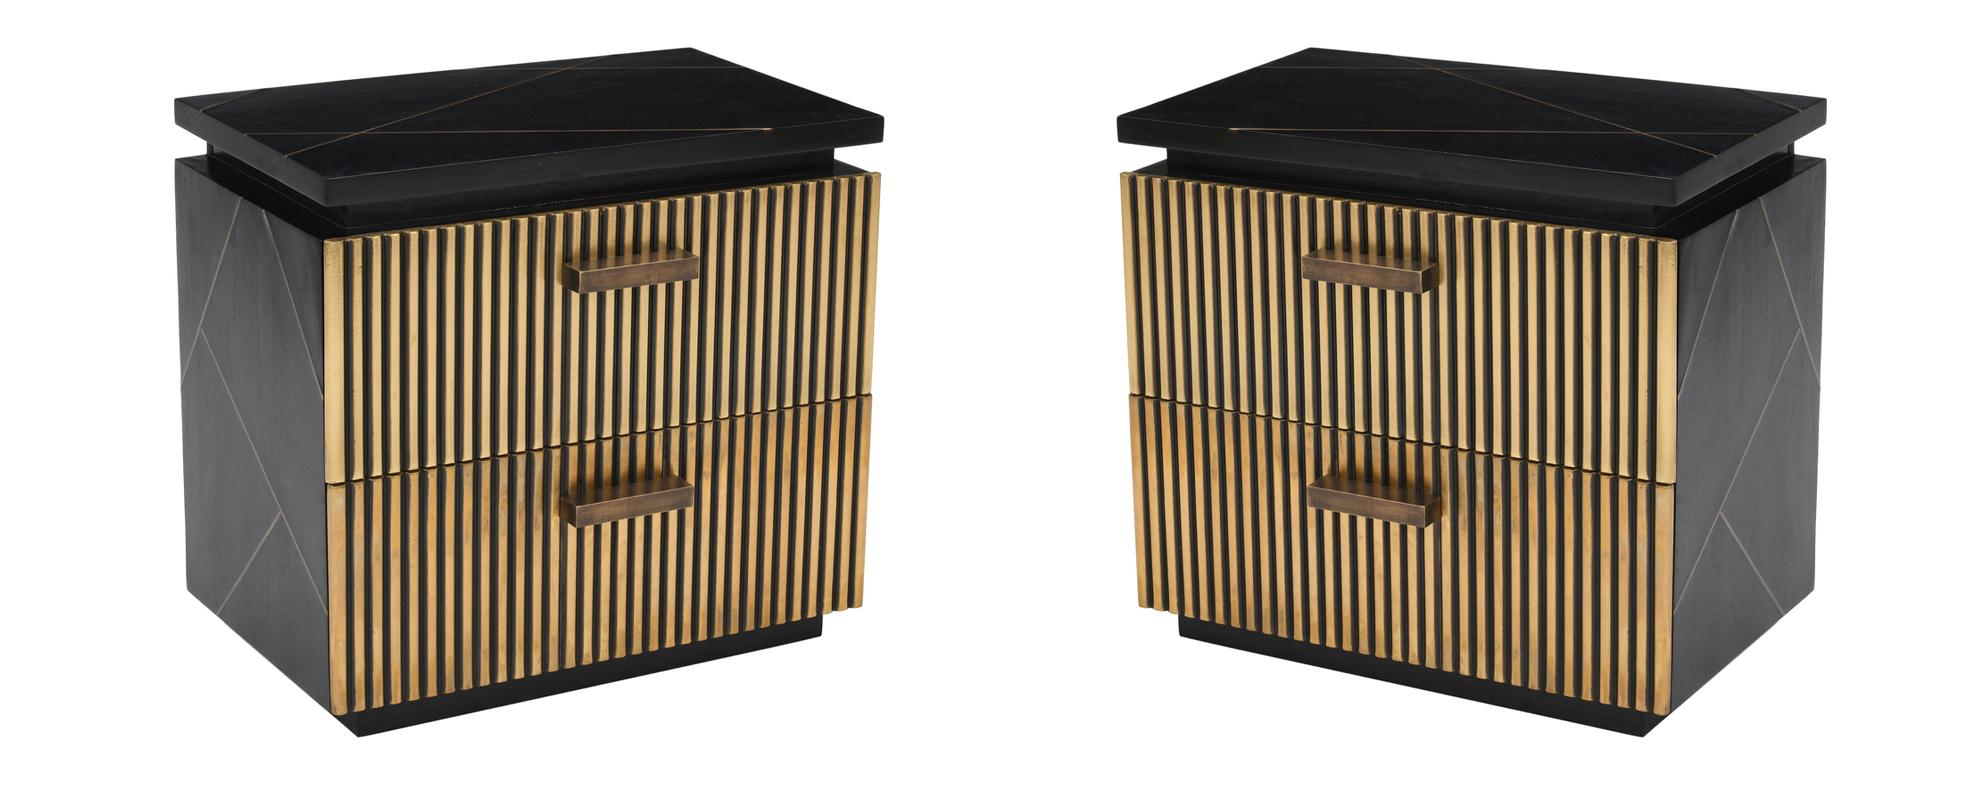 Contemporary, Modern Nightstand Set Allure Allure-N-2PC in Gold, Black 